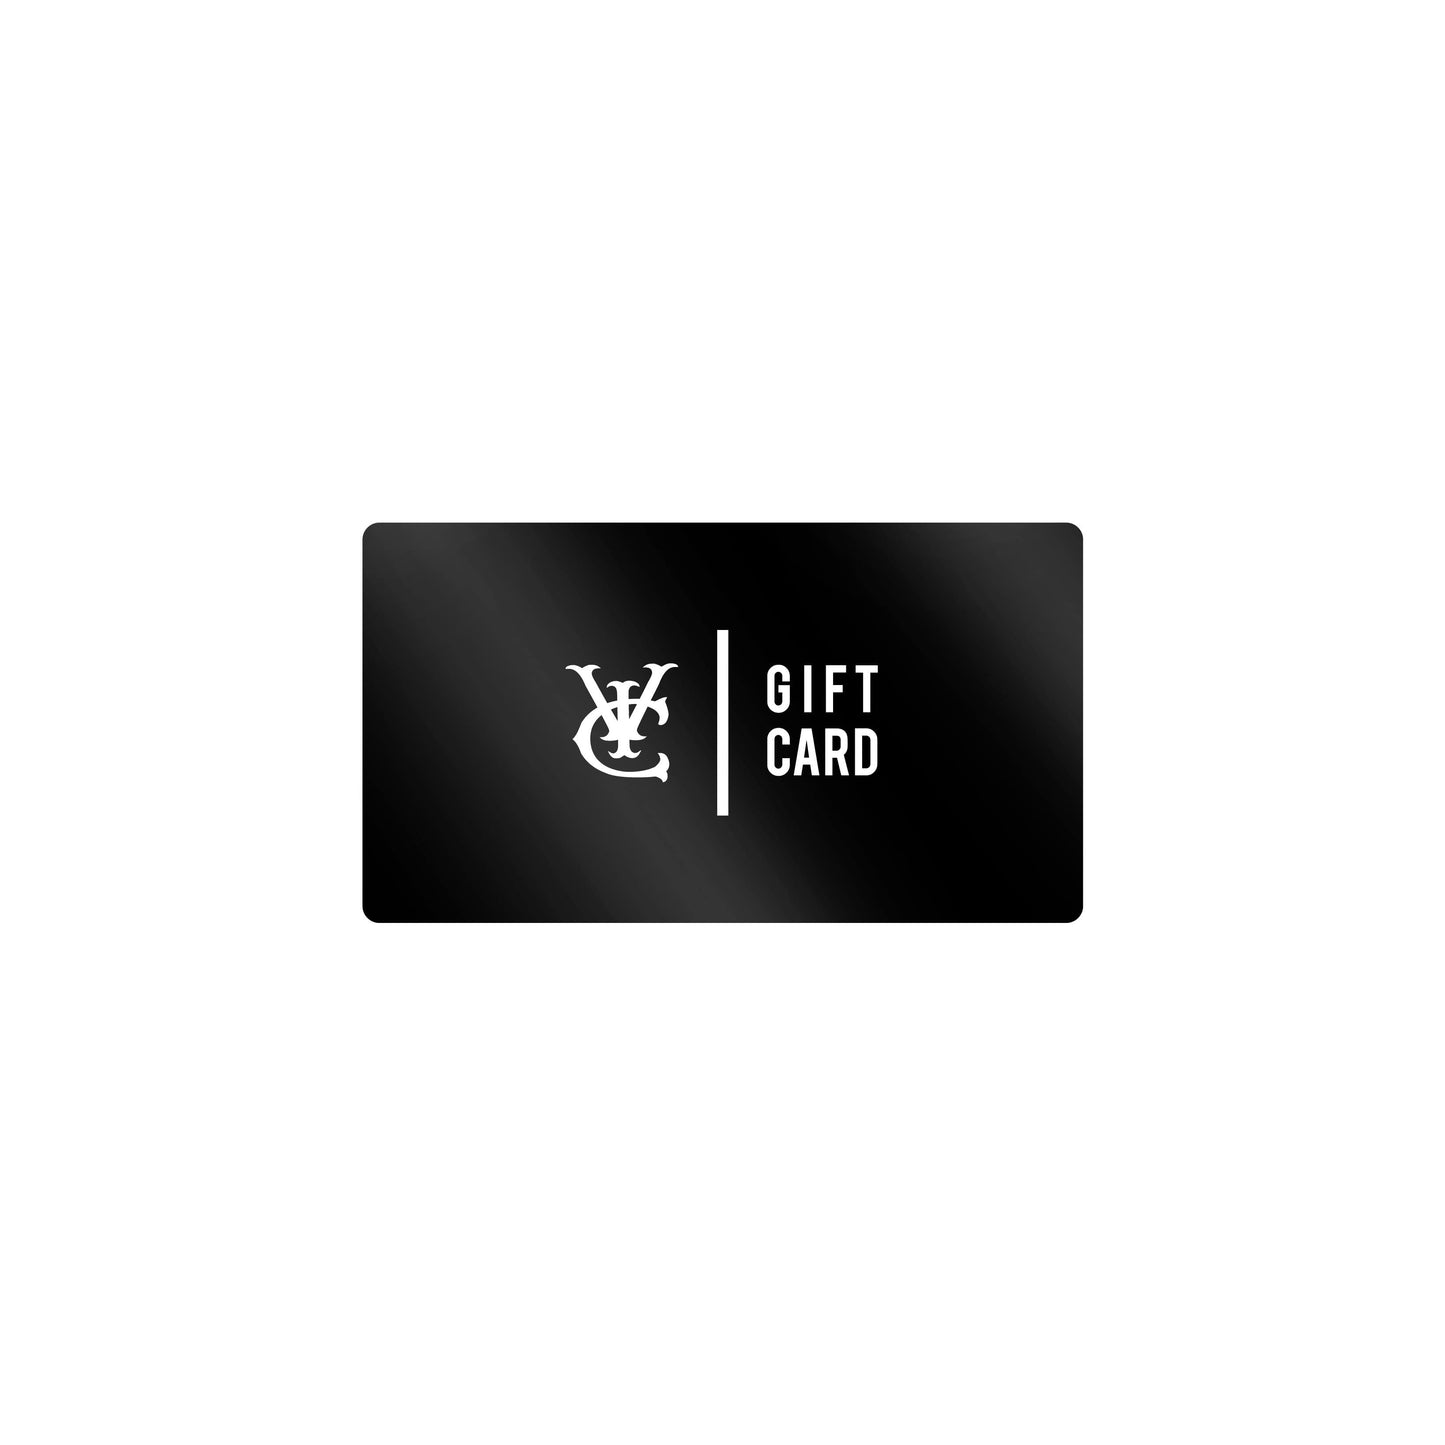 VIC GIFT CARDS